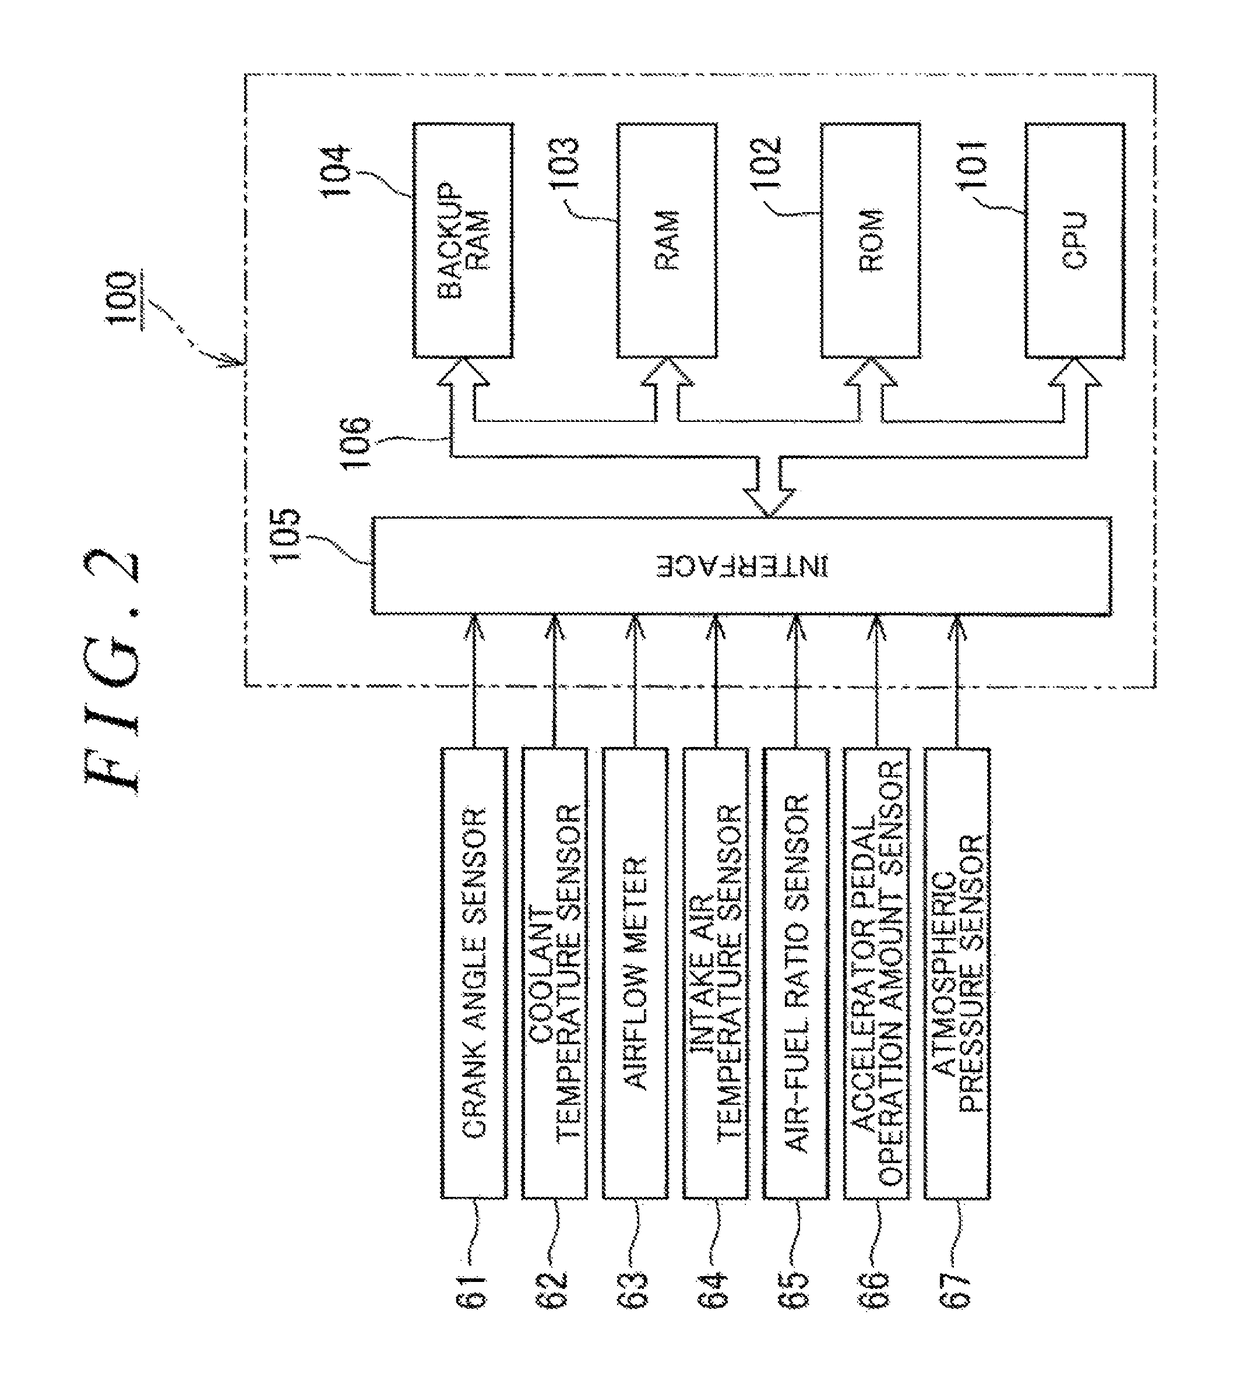 Failure diagnosis apparatus for diagnosing an insufficient output of an internal combustion engine